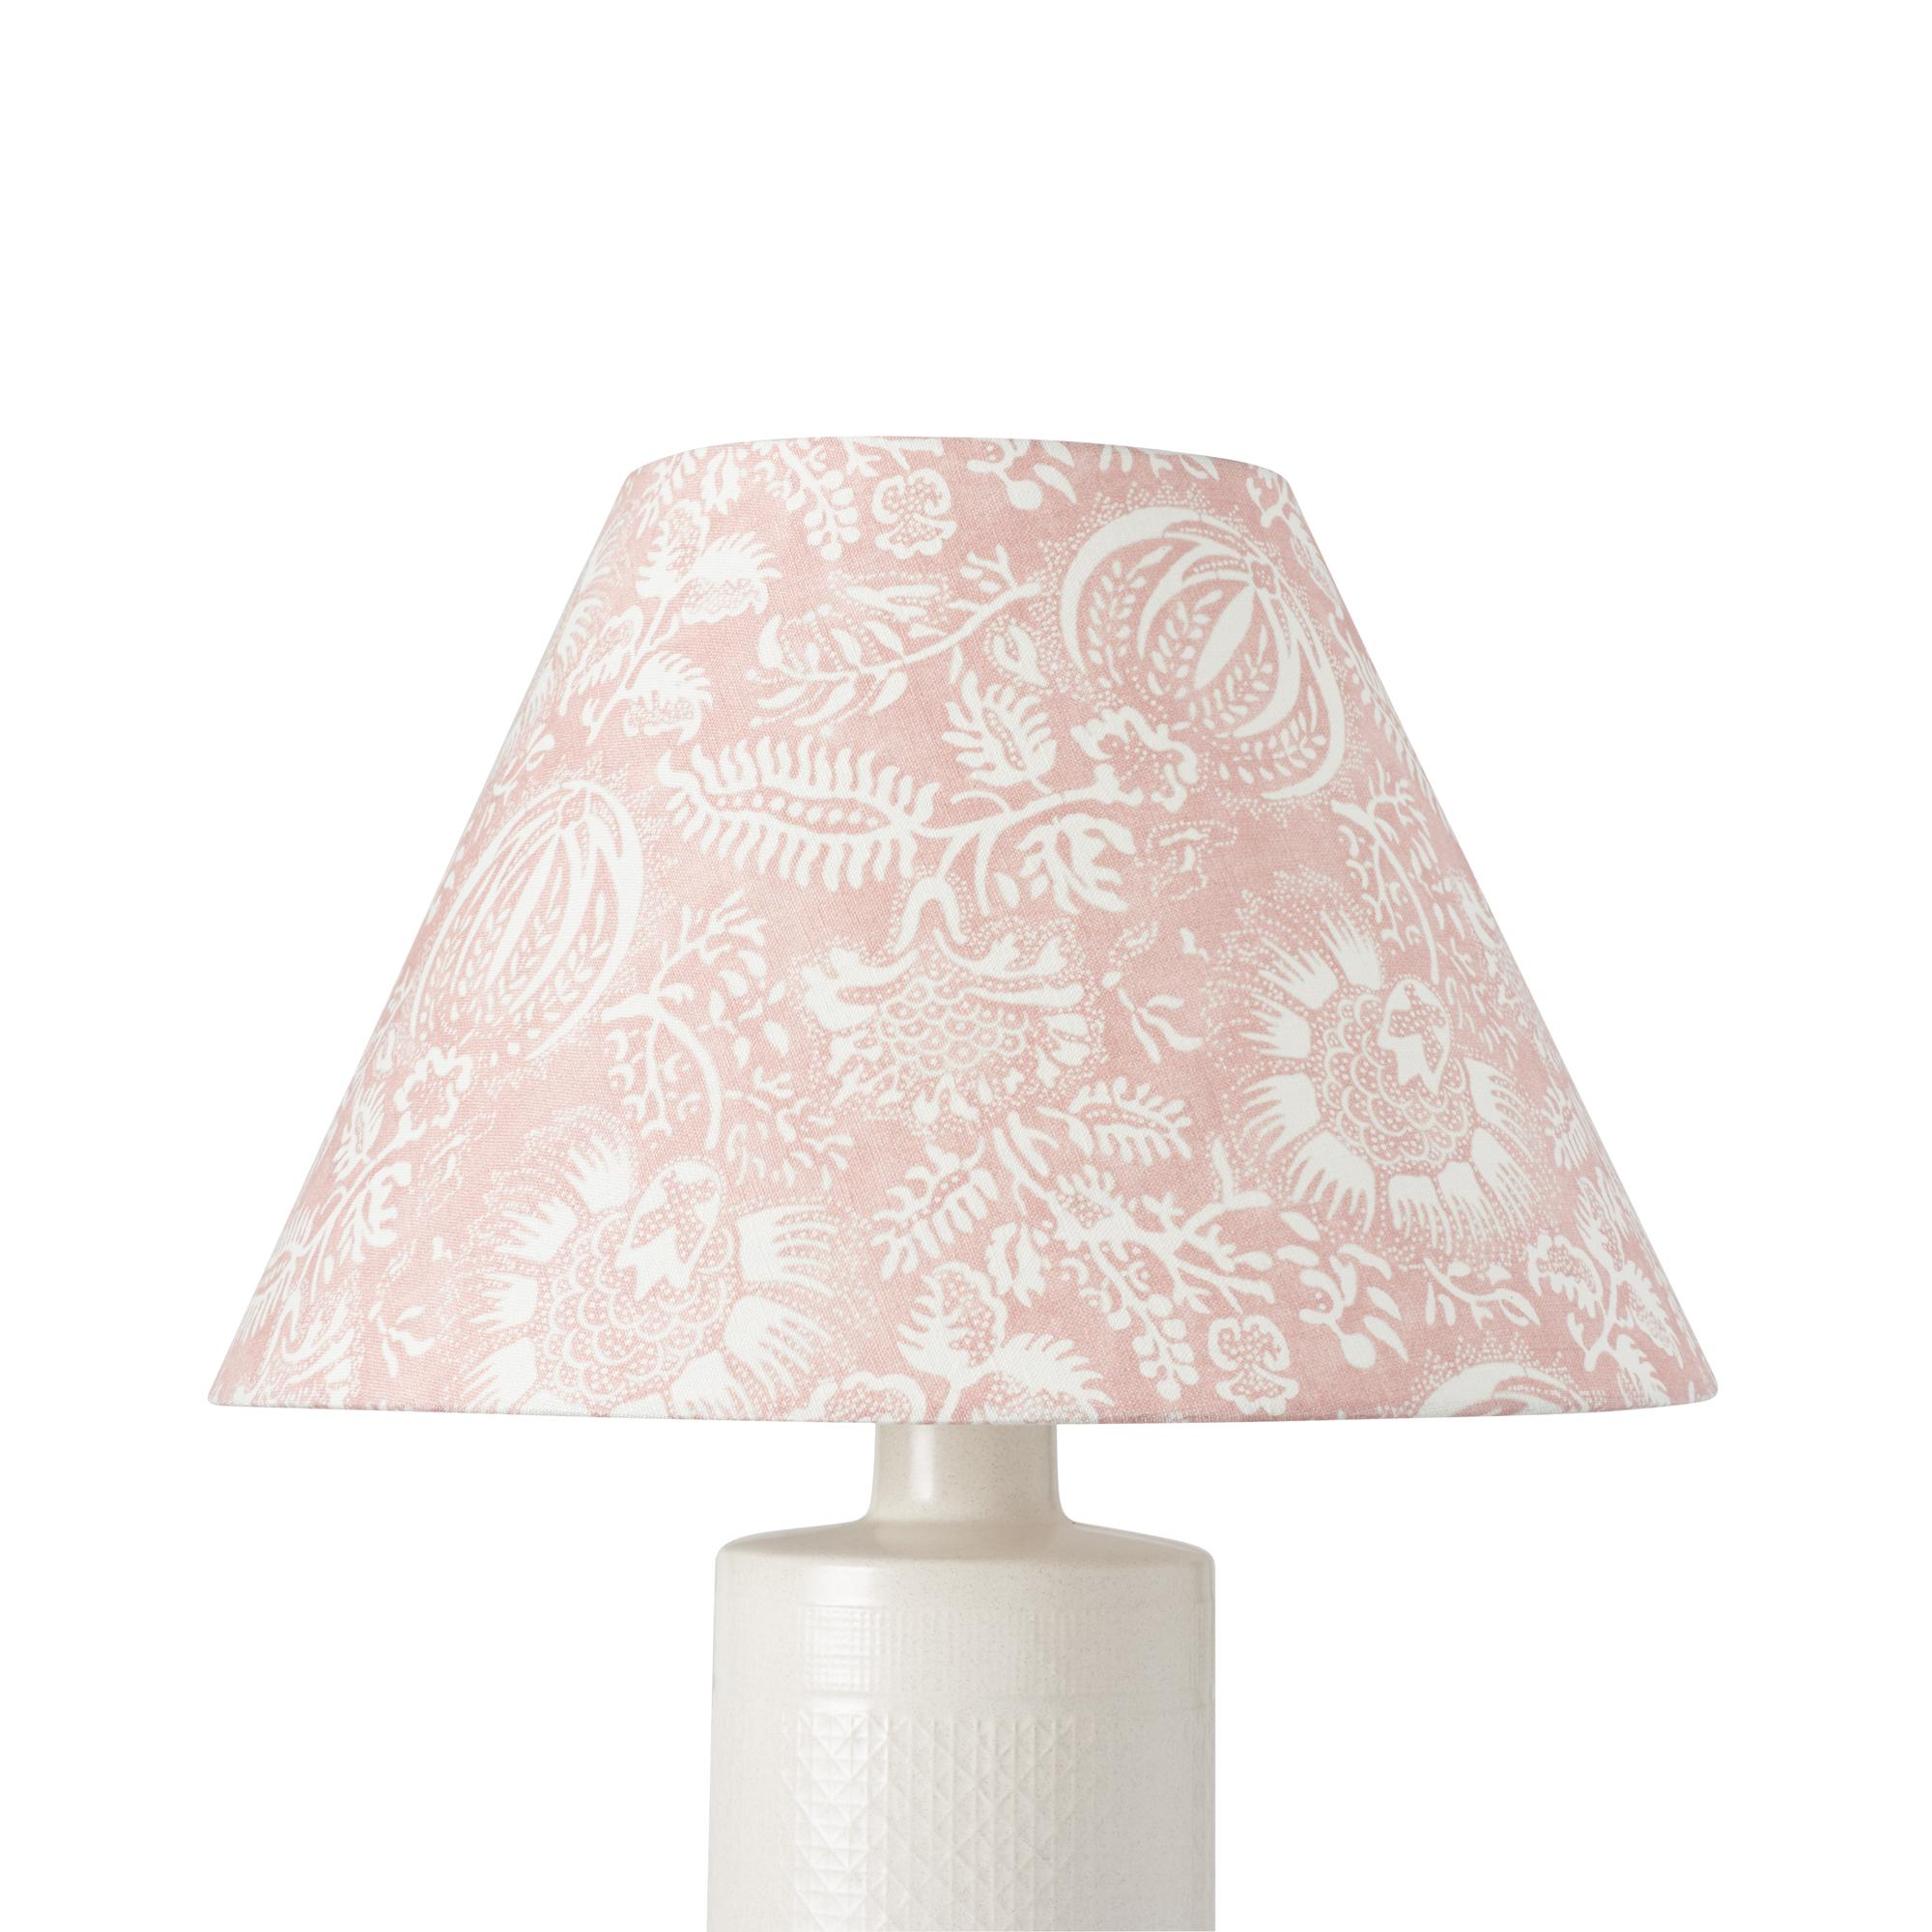 This lampshade features our Pomegranate Print in Petal. This lively pomegranate pattern was inspired by an antique resist print. It's a classic, versatile botanical design with wonderful color variations and textural nuance. Measures: 8